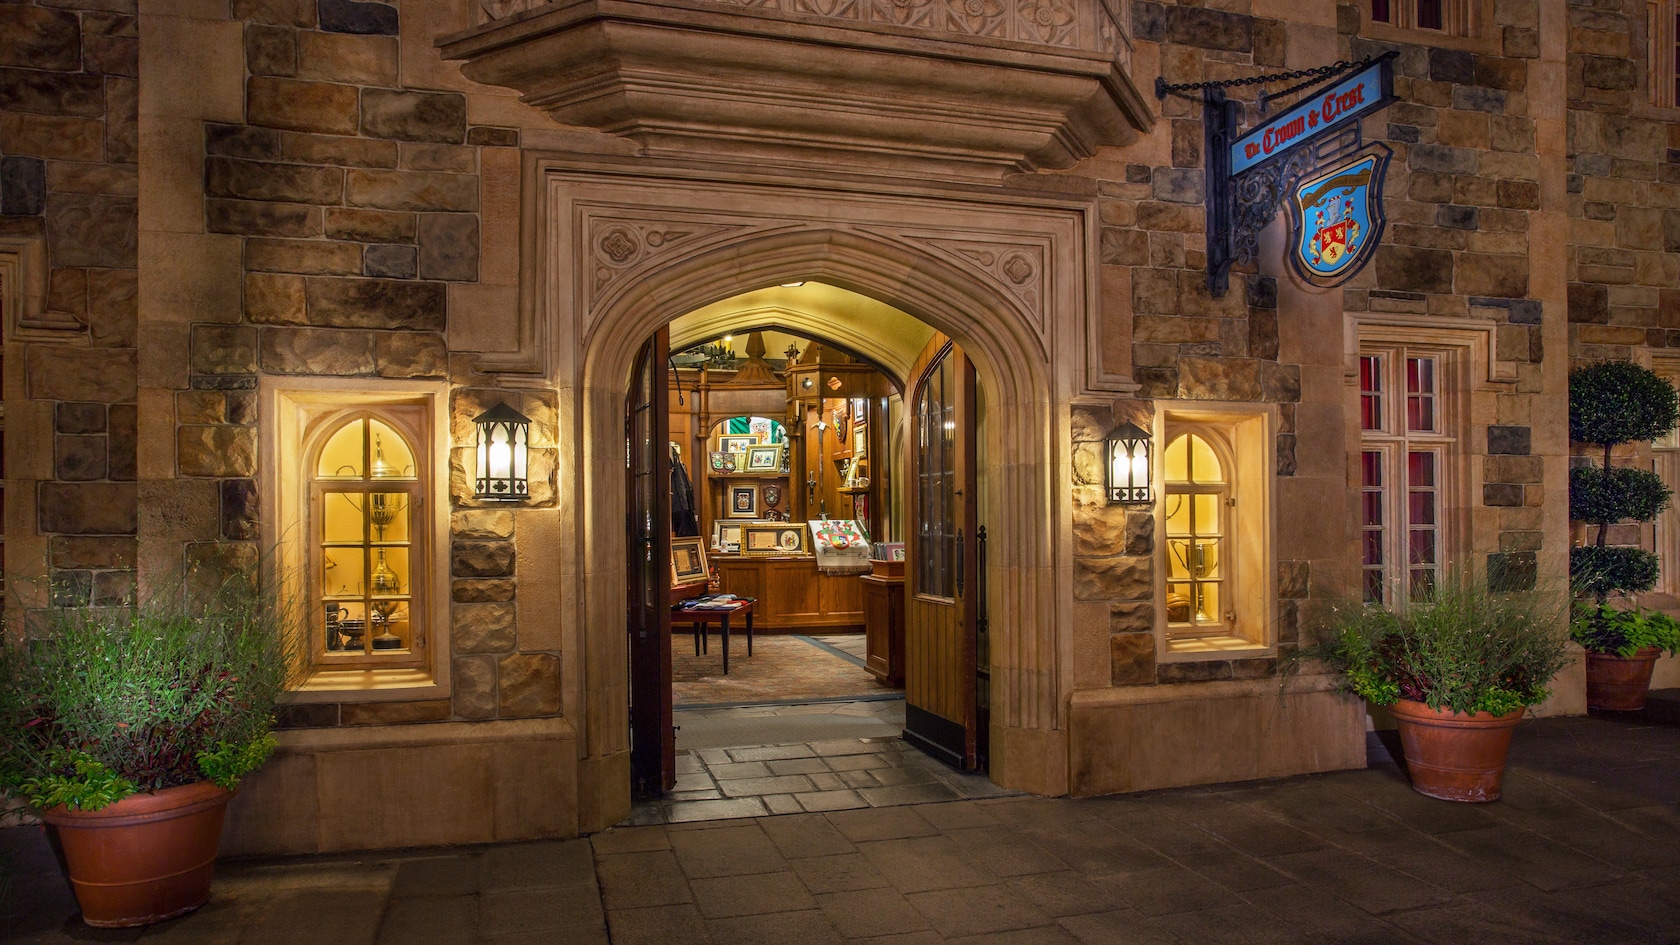 The Crown & Crest shop in the United Kingdom Pavilion at Epcot, lit up at night